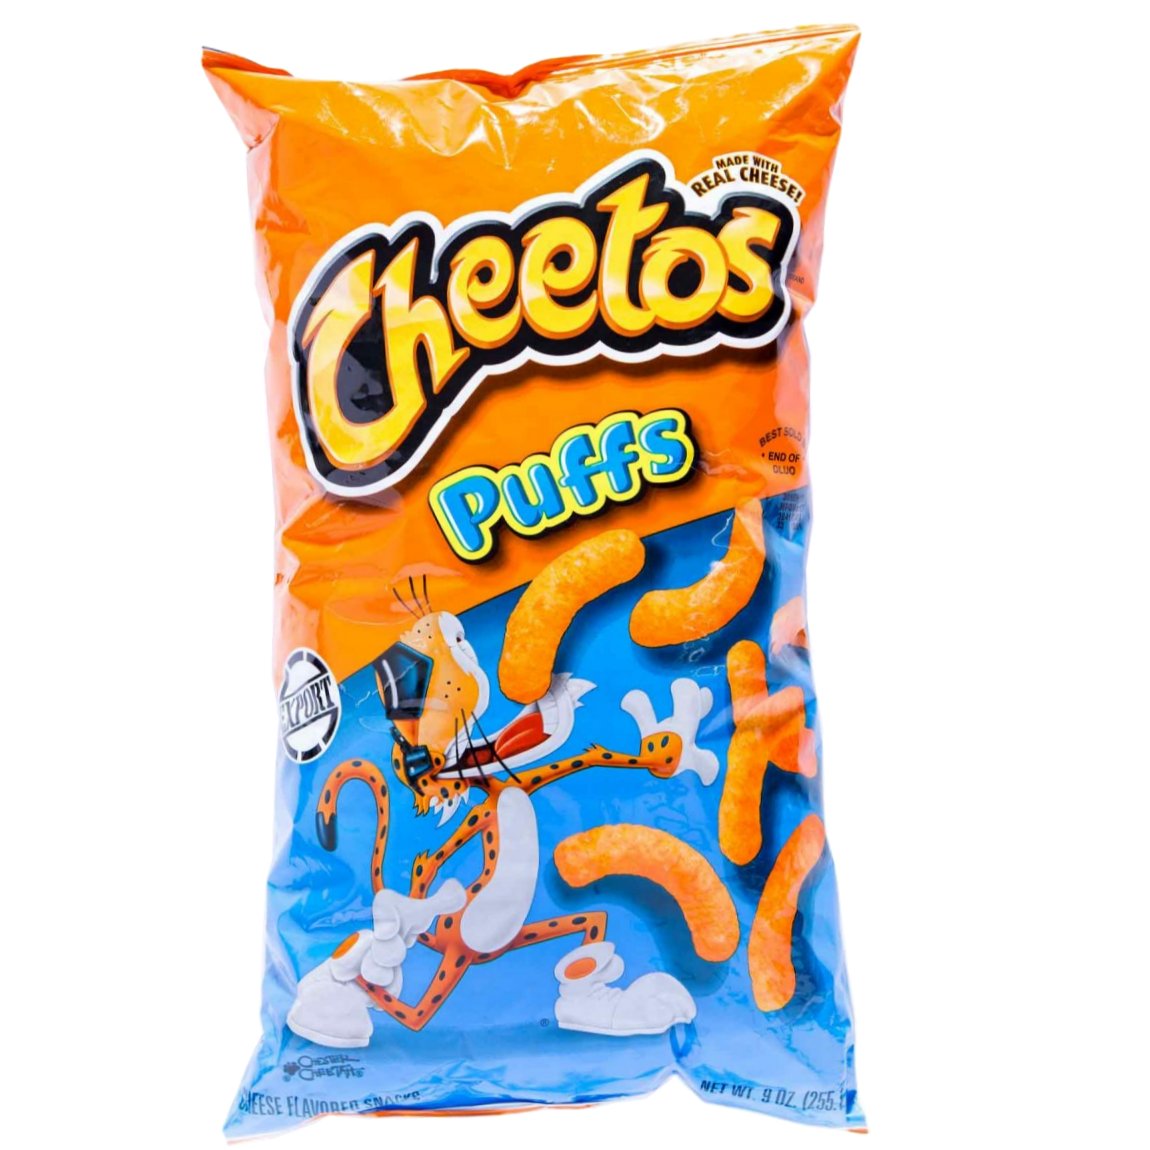 Cheetos Puffs Cheese Flavored Snacks, 1.375 Ounce Bags (Pack Of 8) -  Walmart.com